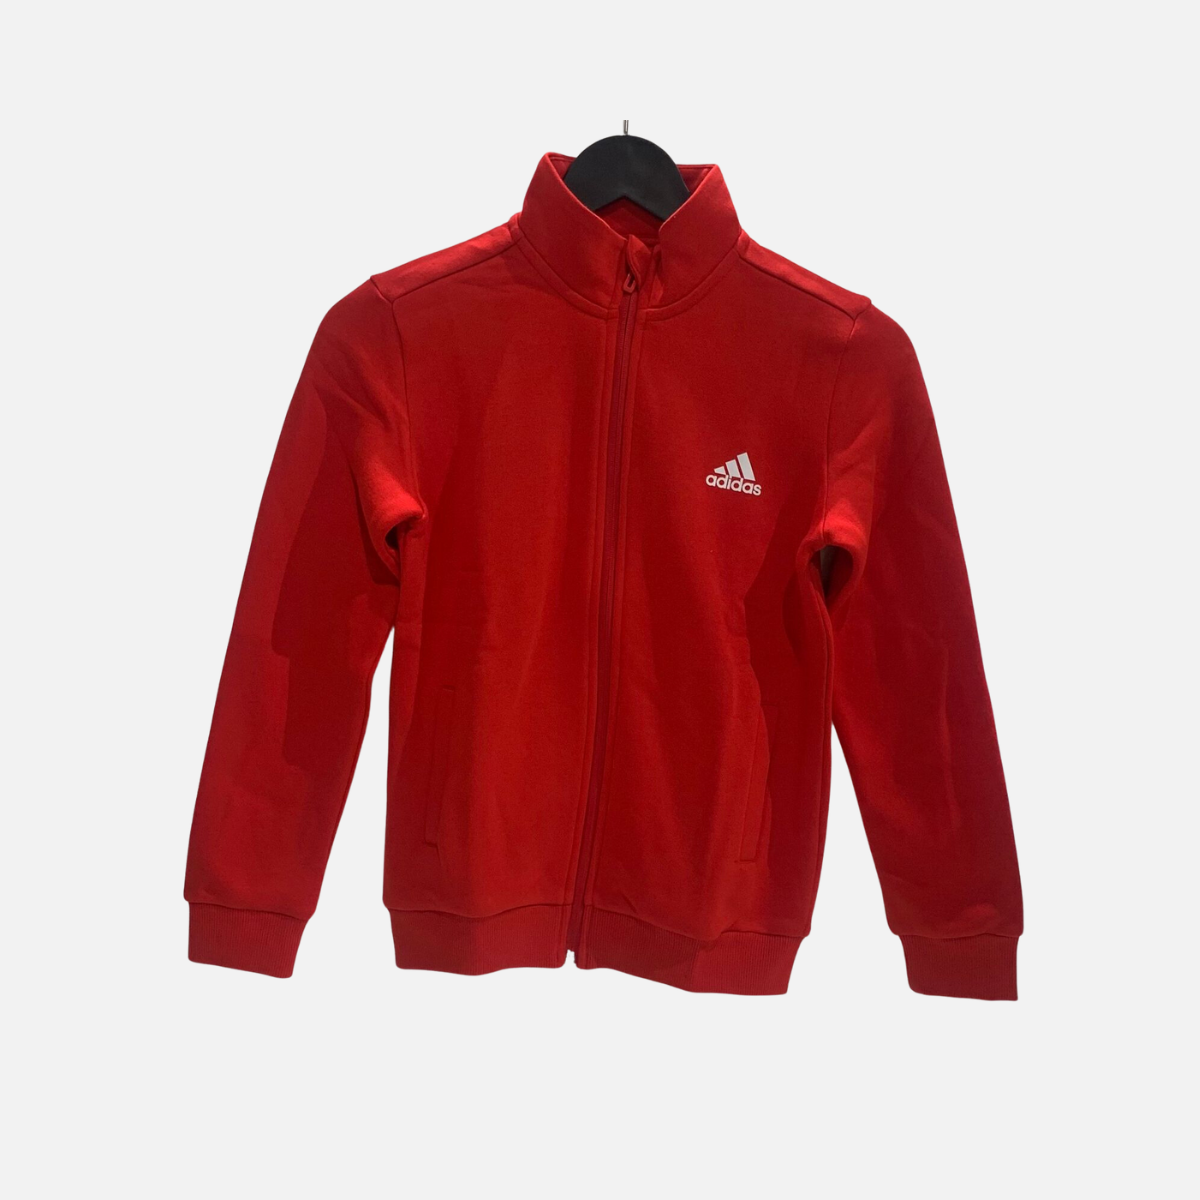 Adidas Linear Kids TrackTop (7-16 Years) -Better Scarlet